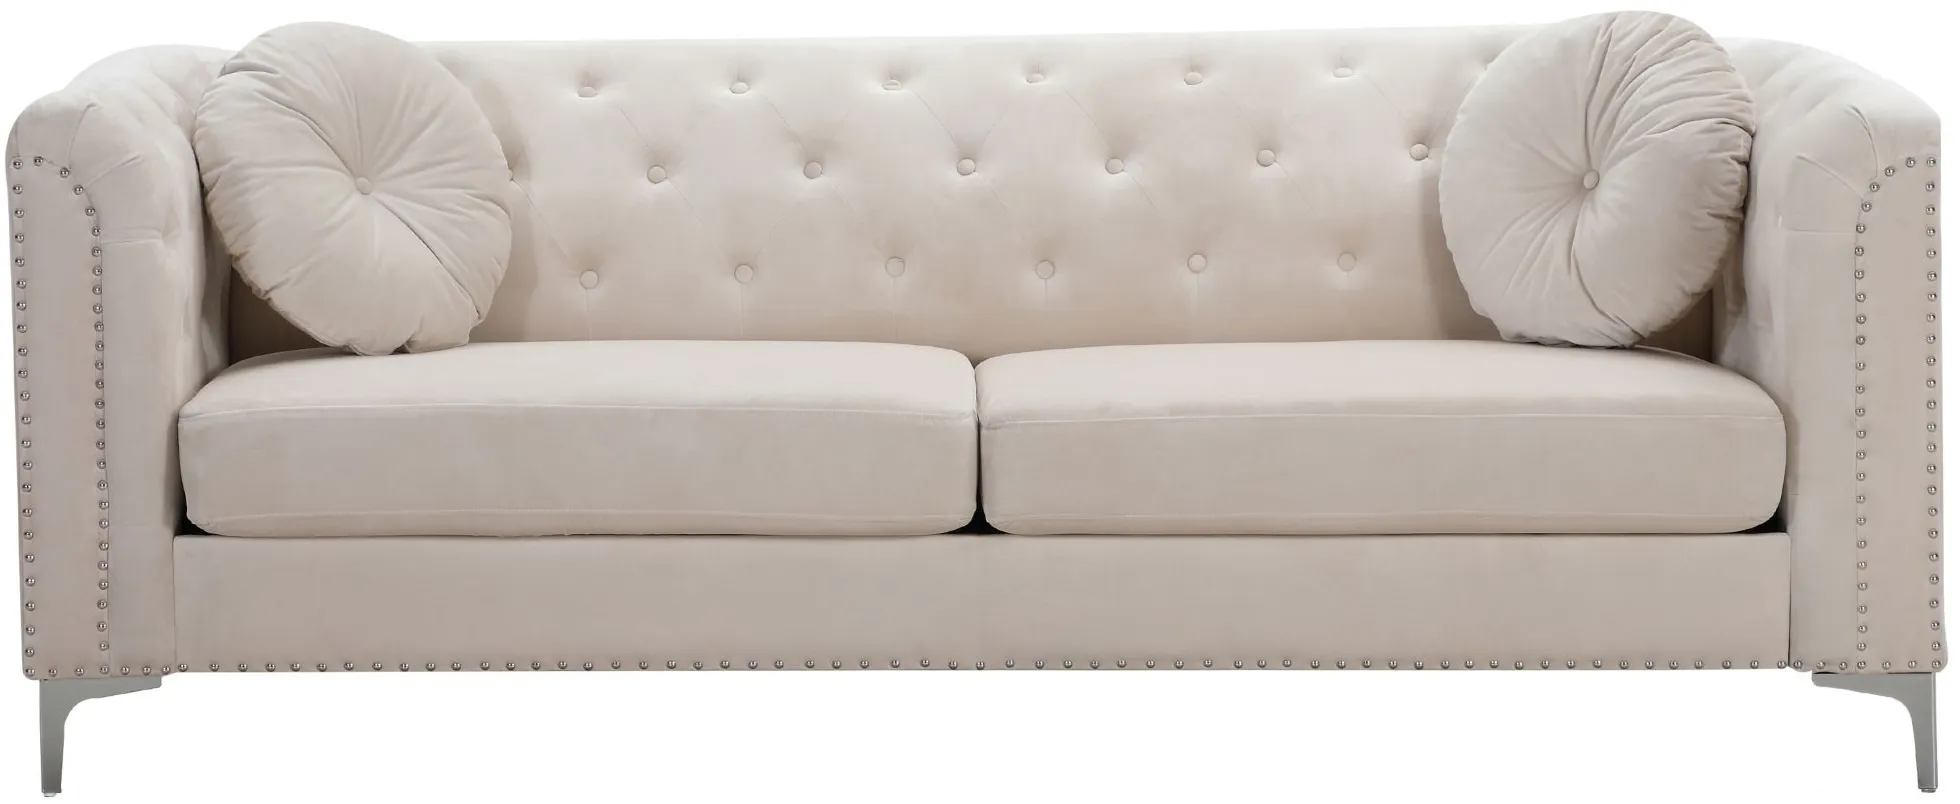 Delray Sofa in Ivory by Glory Furniture